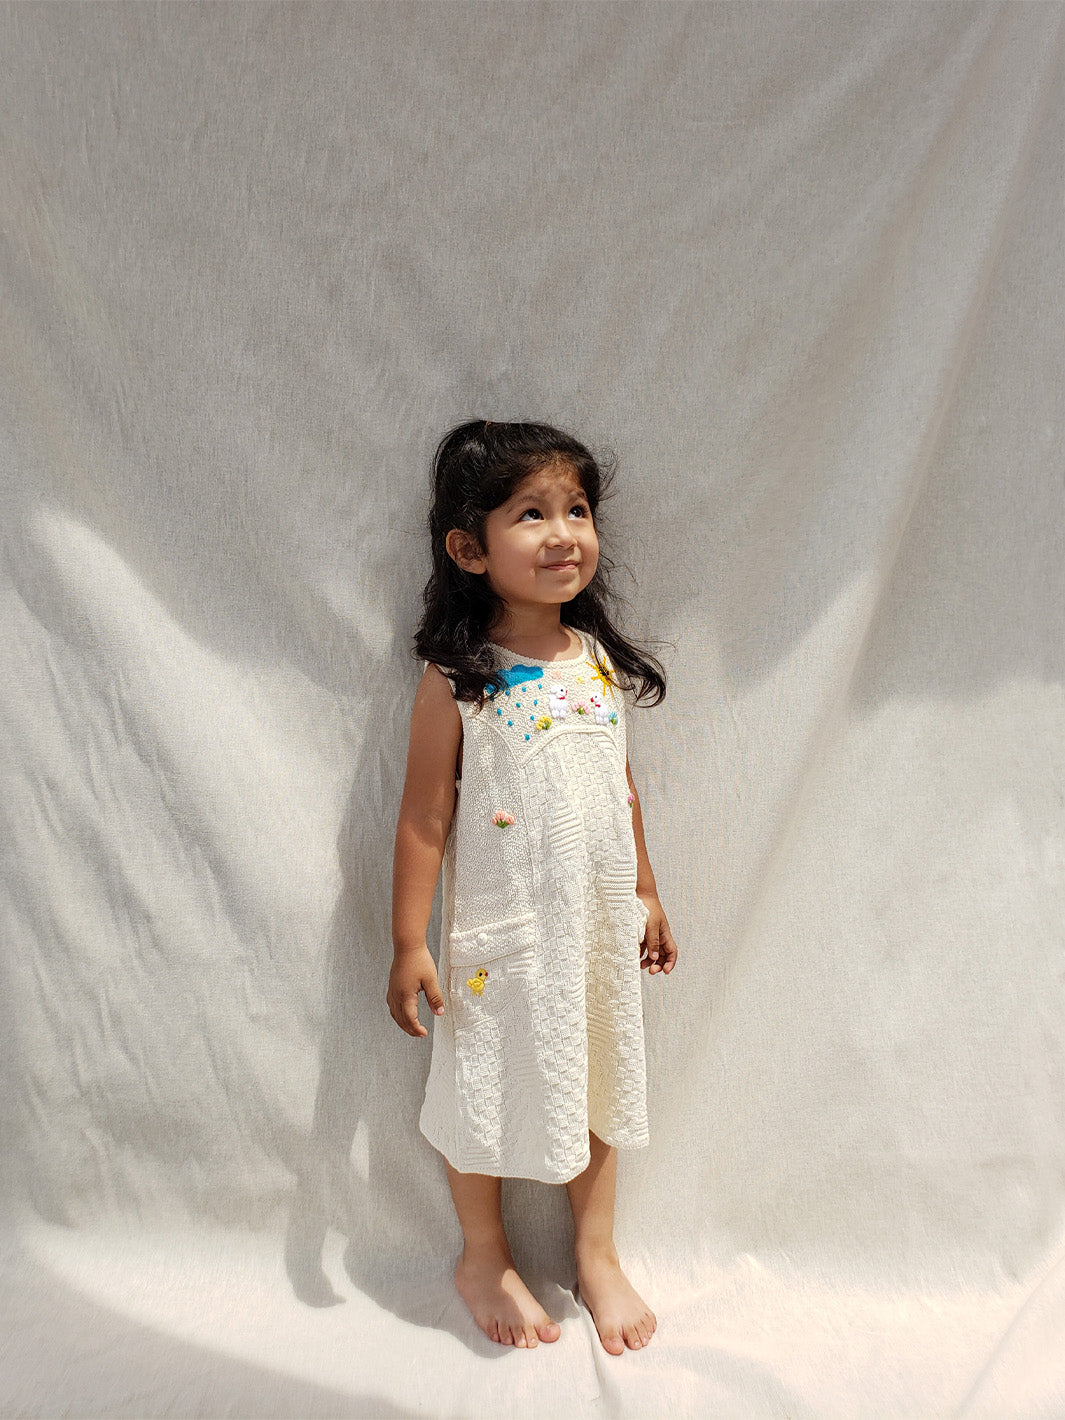 Liten Aventuris Collections. This Nira Dress is made of pure natural Peruvian tanguis cotton. So it's as comfy as it is stylish! It has a combination of geometric knitted patterns, two diagonal front pockets and decorative coconut buttons. With cute hand embroidery of colorful flowers, and friendly little animals, it's perfect for inspiring any little girl's imagination and bringing happiness to their wardrobe! Ethically made in Peru. Ekologisk klänning för flickor och bebisar.